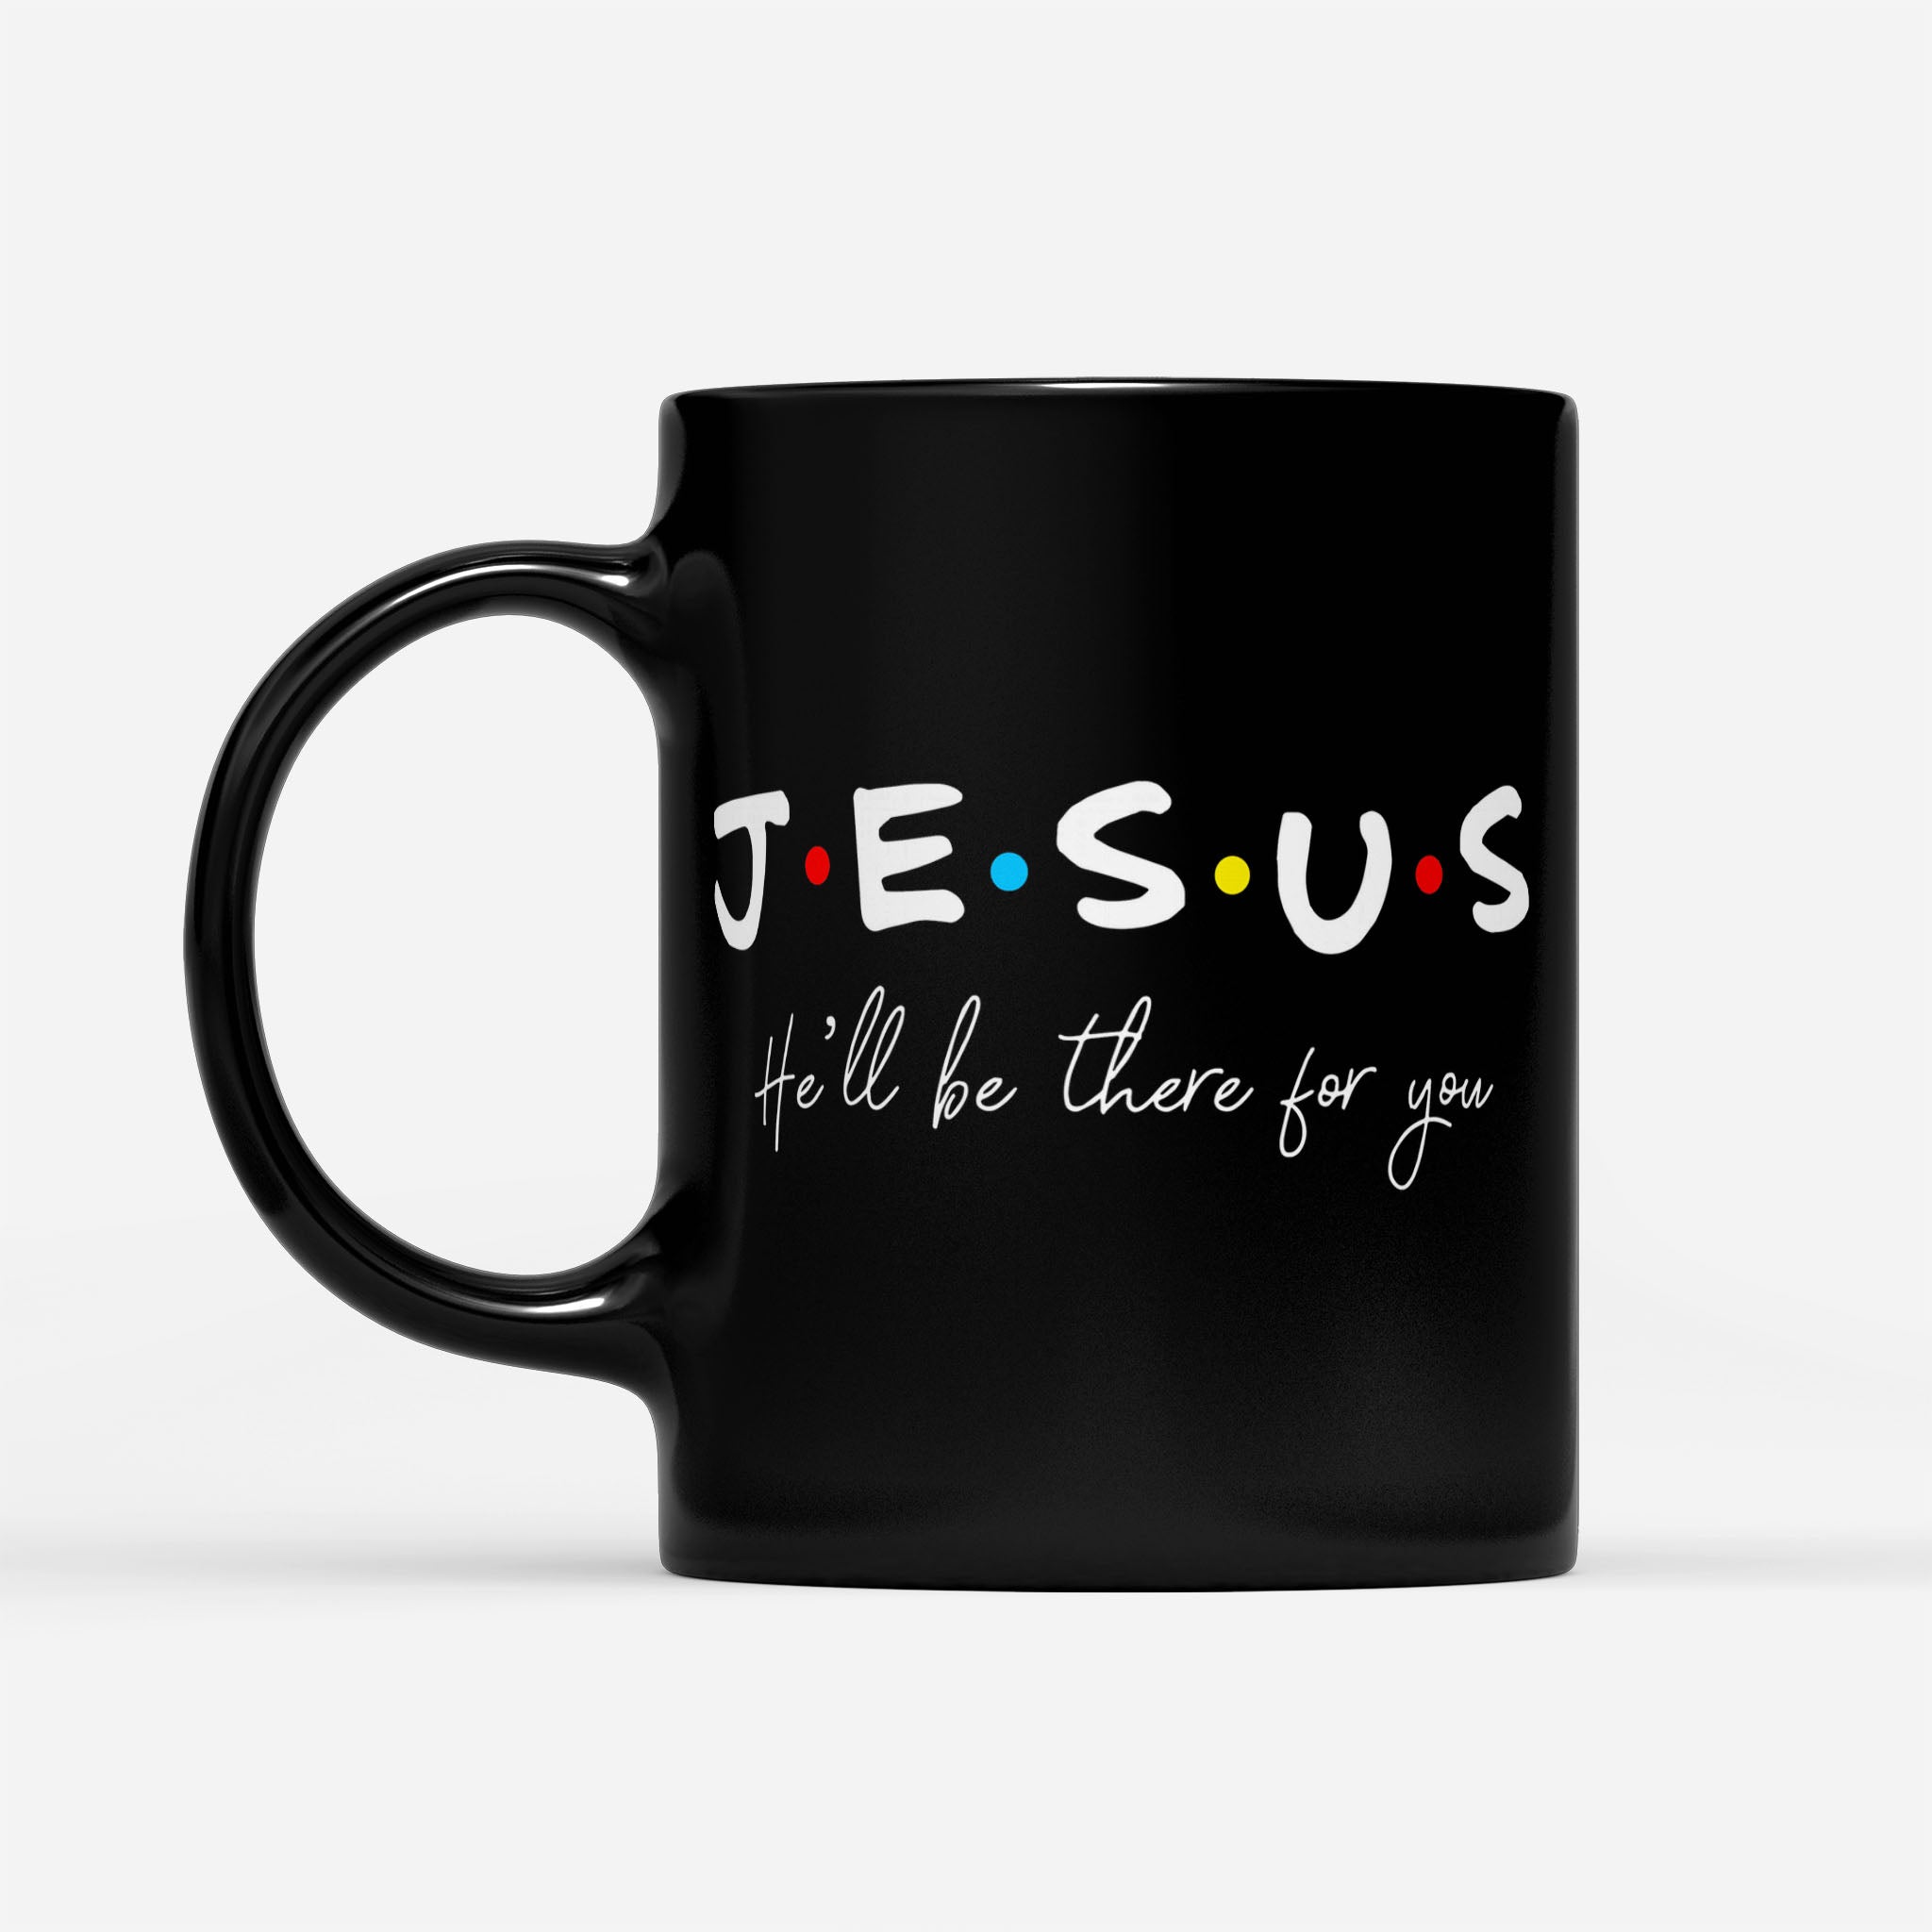 Jesus He'll Be There For You - Black Mug